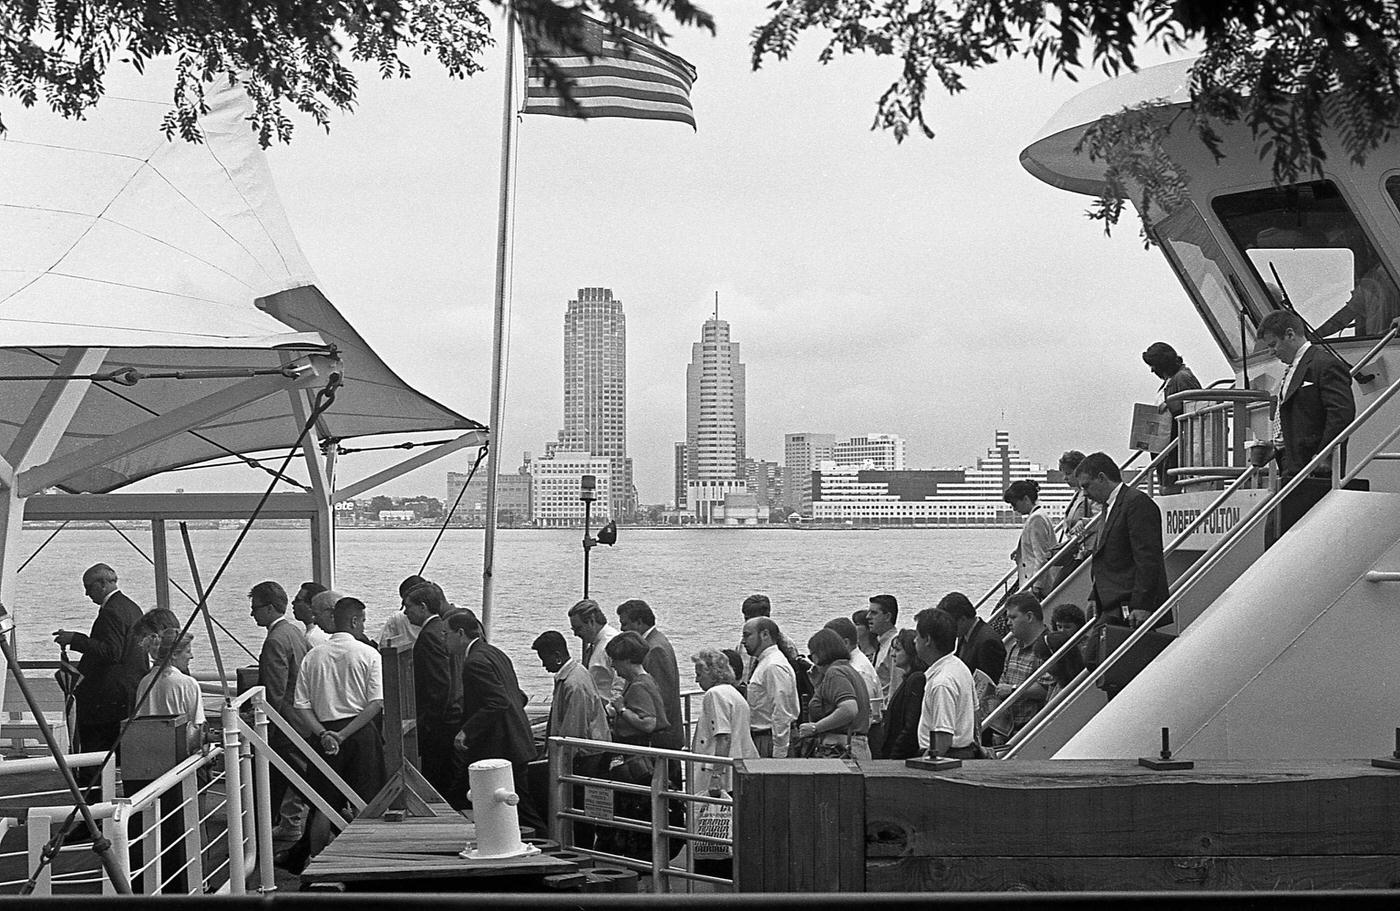 Commuters Exiting The Robert Fulton Ferry In Battery Park City, With The Hudson River And Jersey City Skyline Visible, Manhattan, 1997.